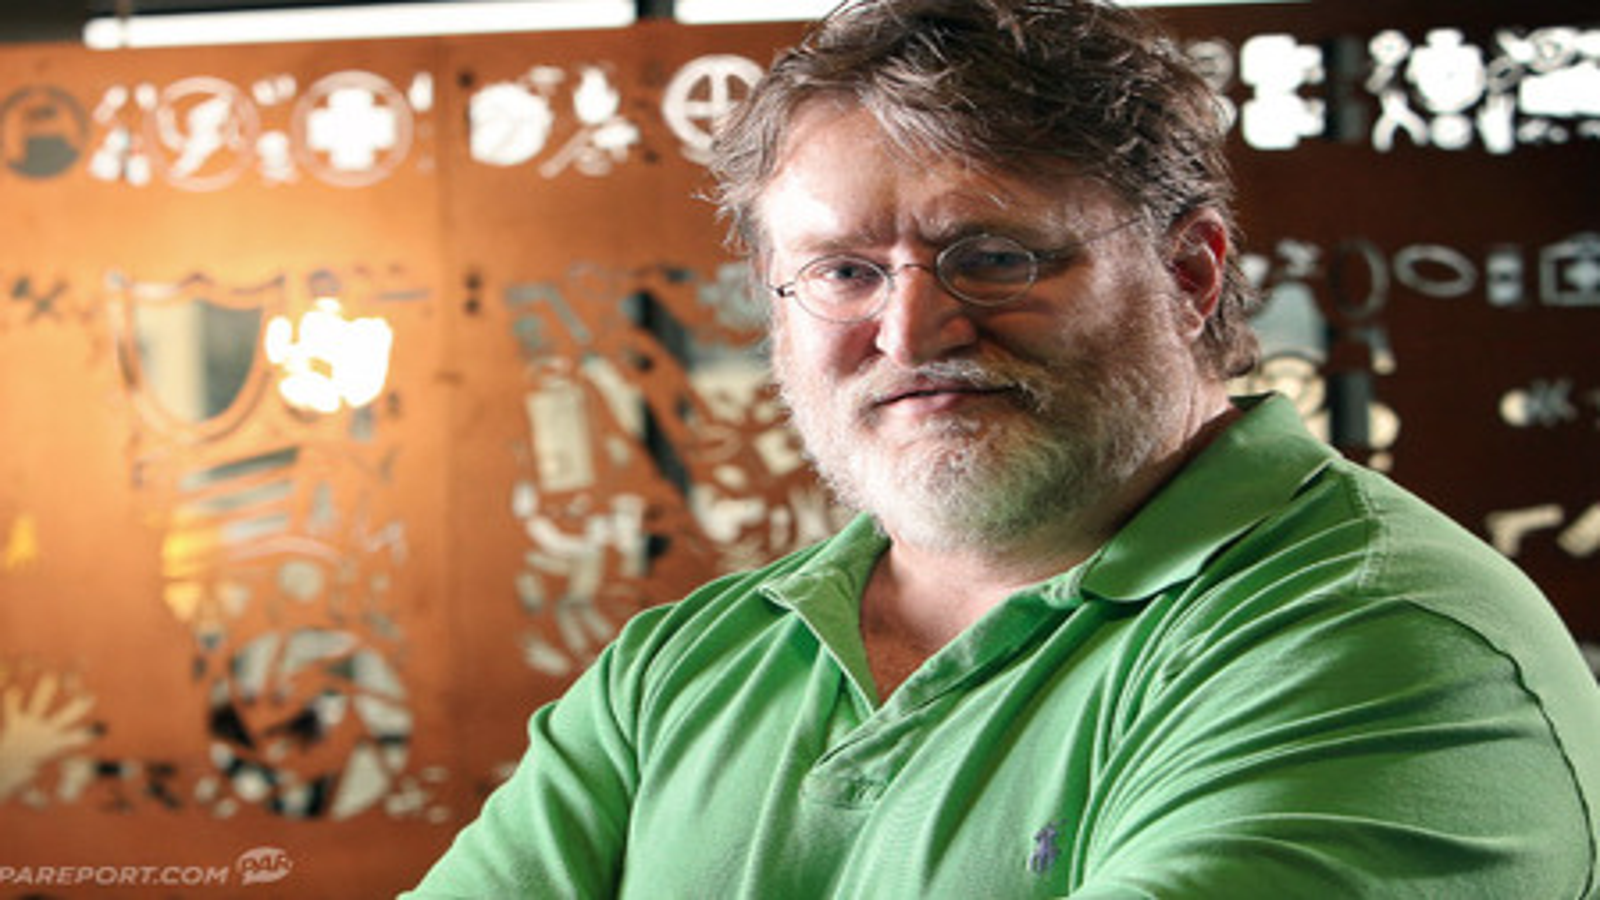 Gabe Newell Age, Net Worth, Height, Bio, Facts